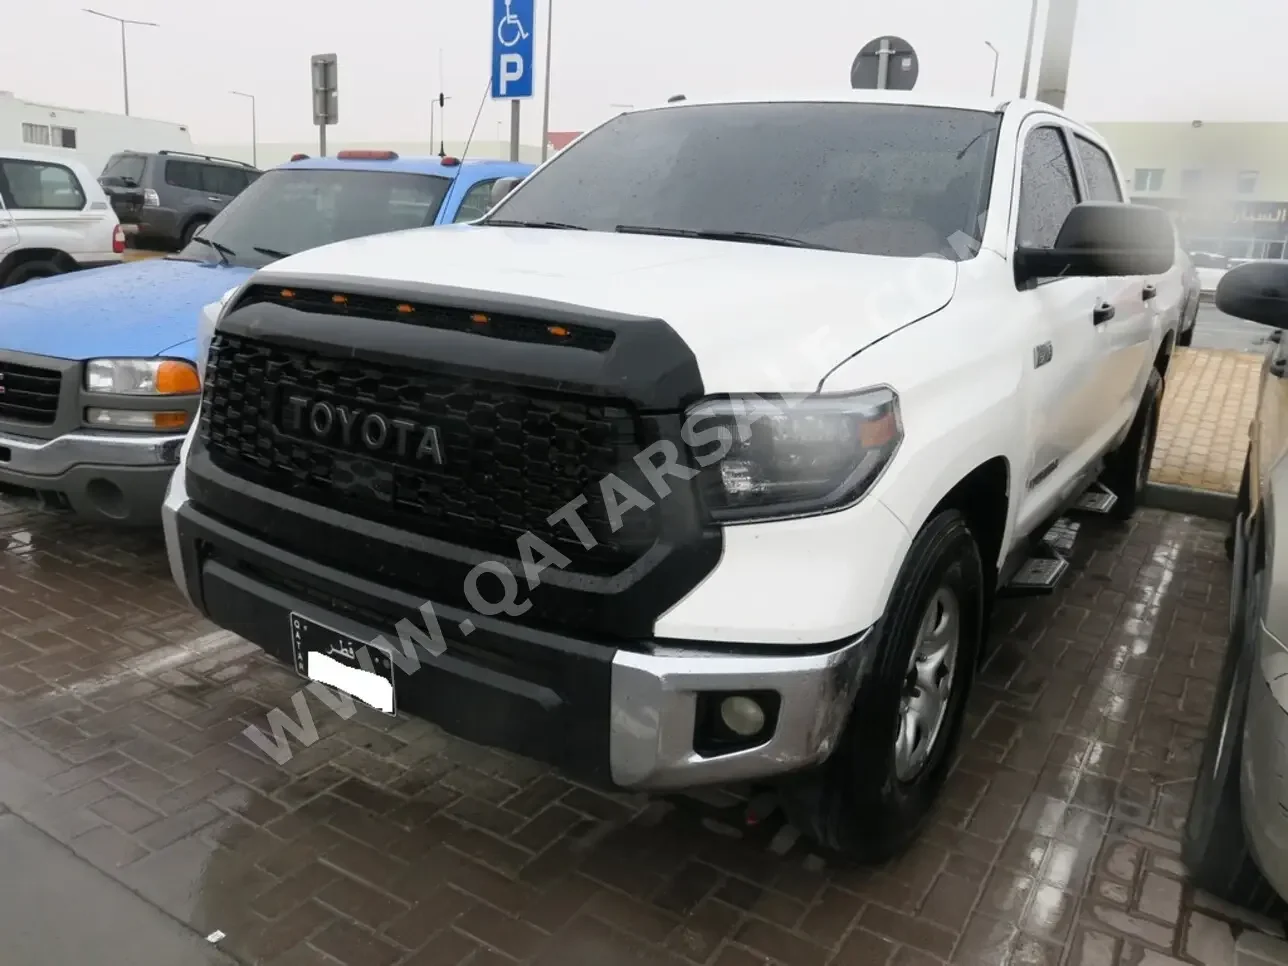 Toyota  Tundra  TRD  2016  Automatic  102,000 Km  8 Cylinder  Four Wheel Drive (4WD)  Pick Up  White